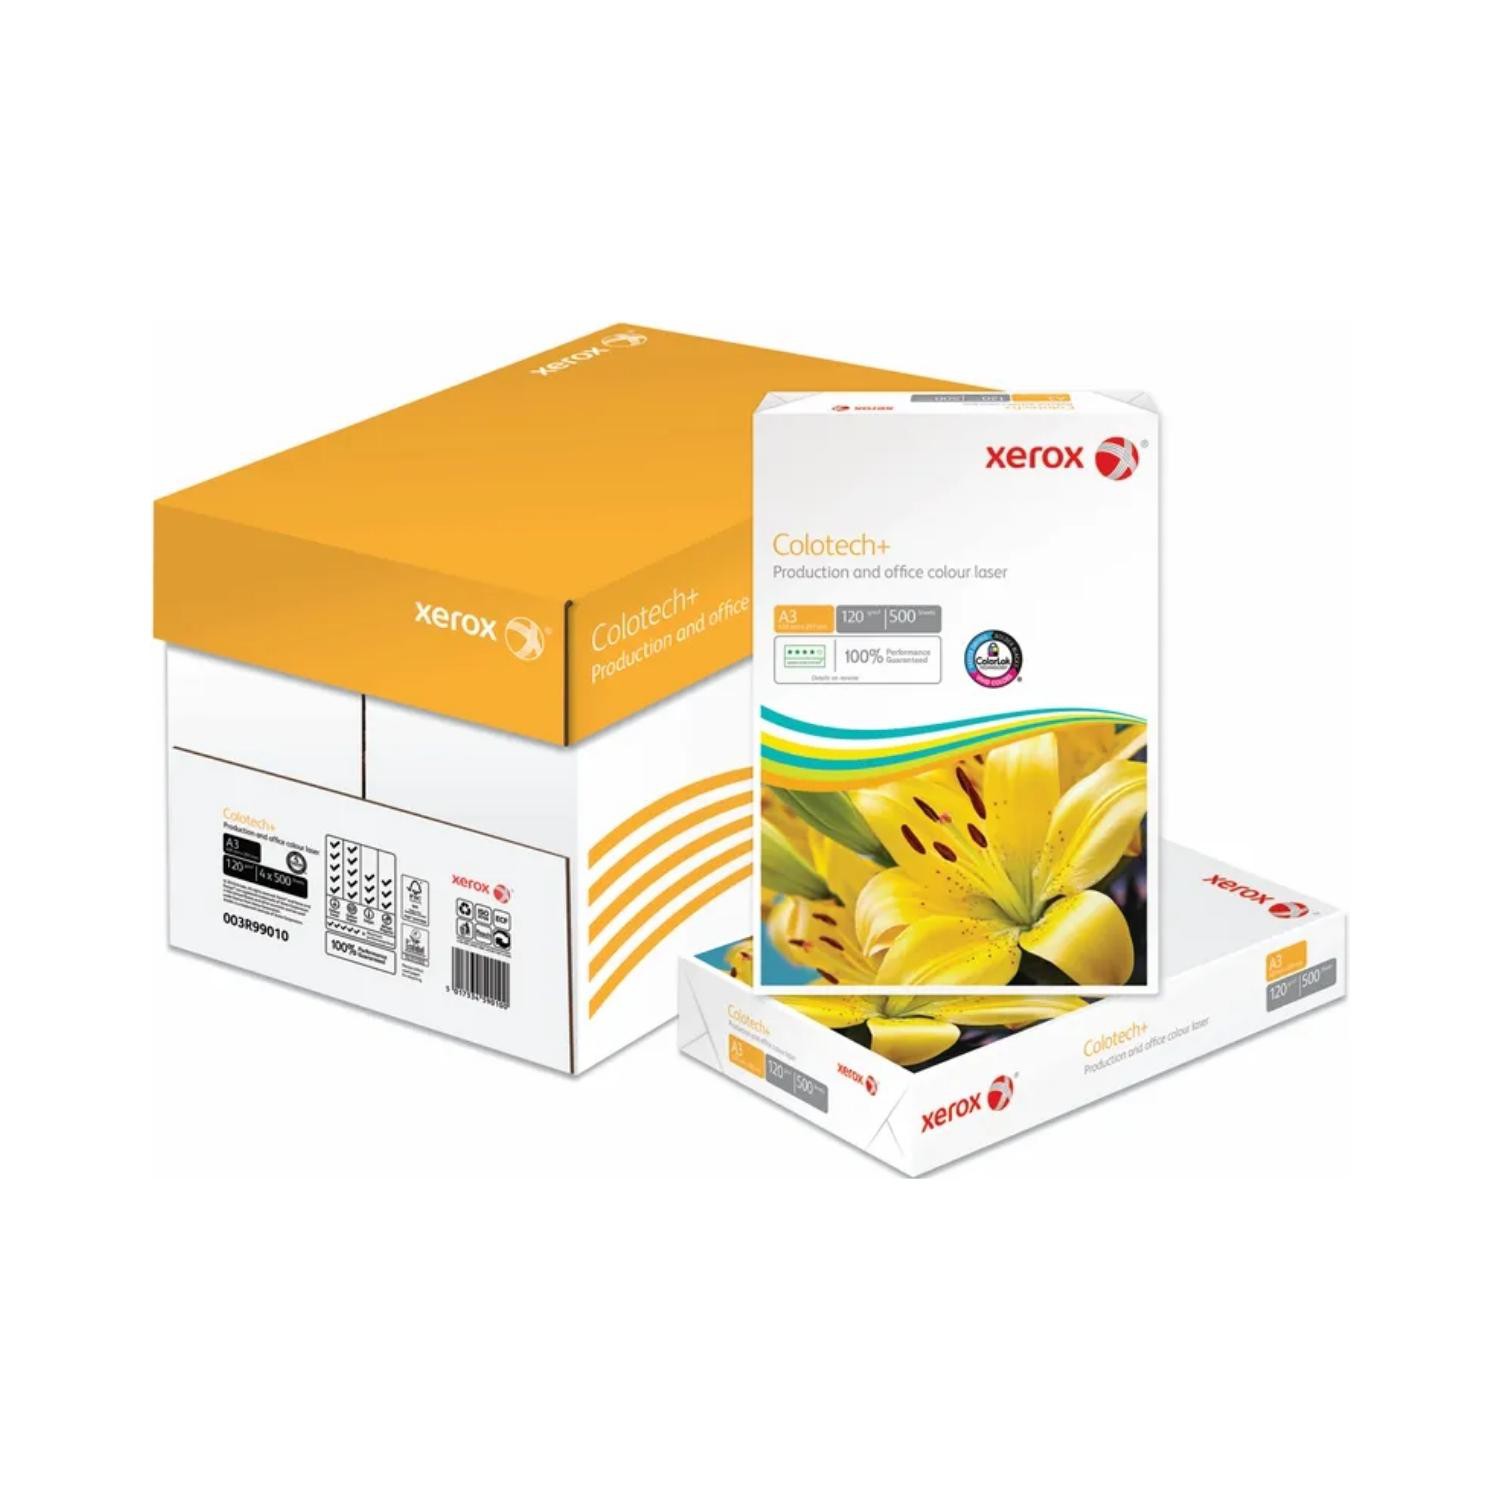 Xerox+Colotech%2B+A3+Super+Smooth+Paper+120gsm+White+500+Sheets